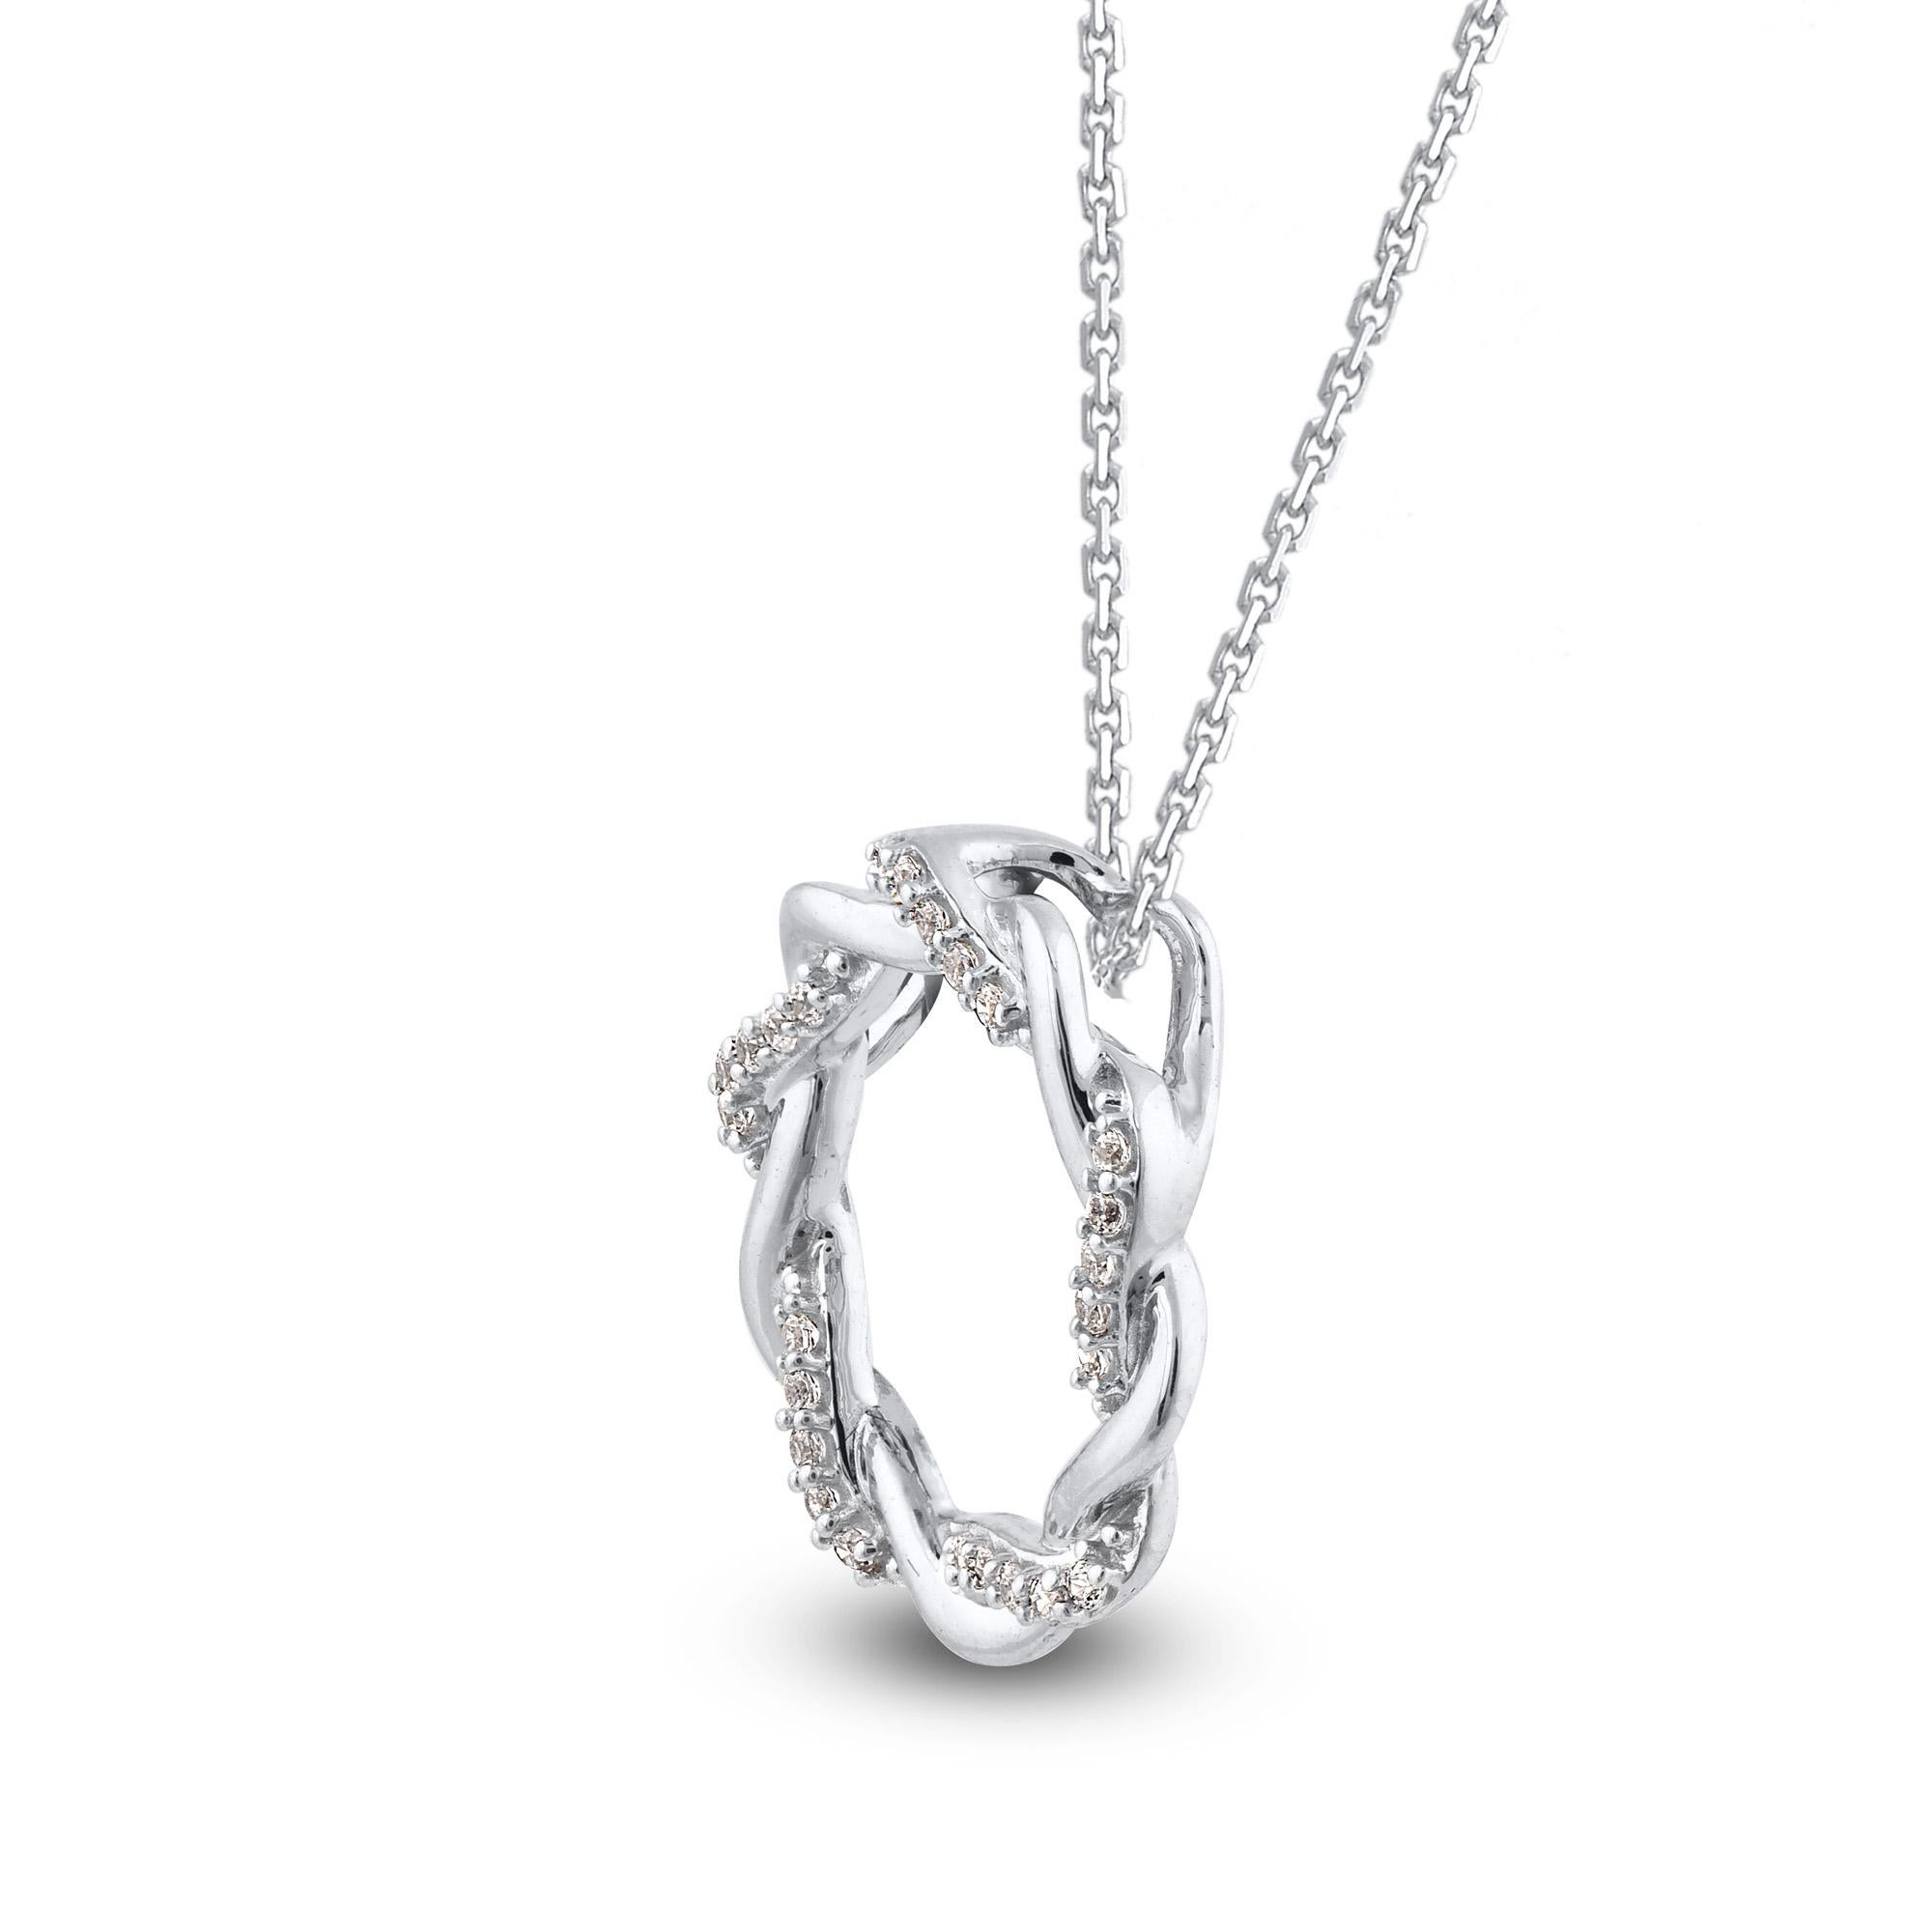 Simple and elegant, this twist open circle eternity pendant are studded with 25 round single cut natural diamonds in prong setting and crafted in 18kt white gold. Diamonds are graded as H-I color and I-2 clarity. Pendant suspends along a cable chain